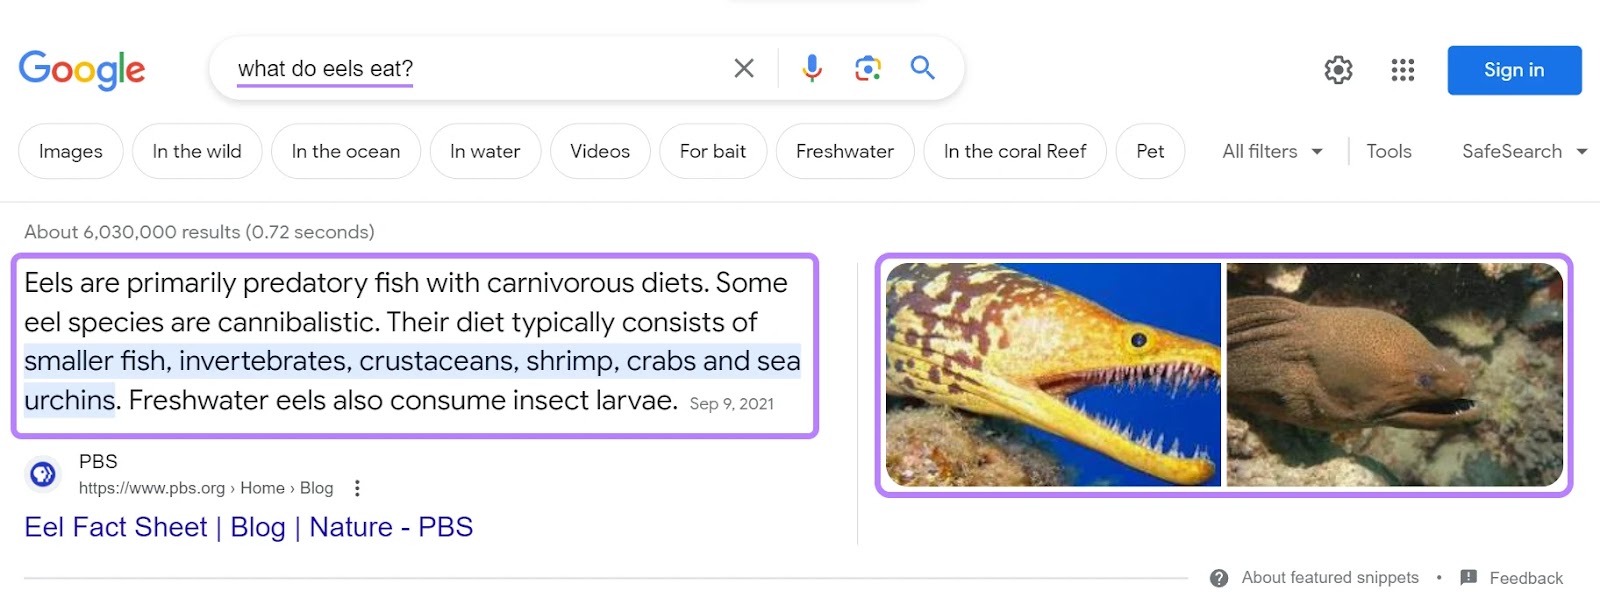 A featured snippet connected  Google's SERP for "what bash  eels eat" query